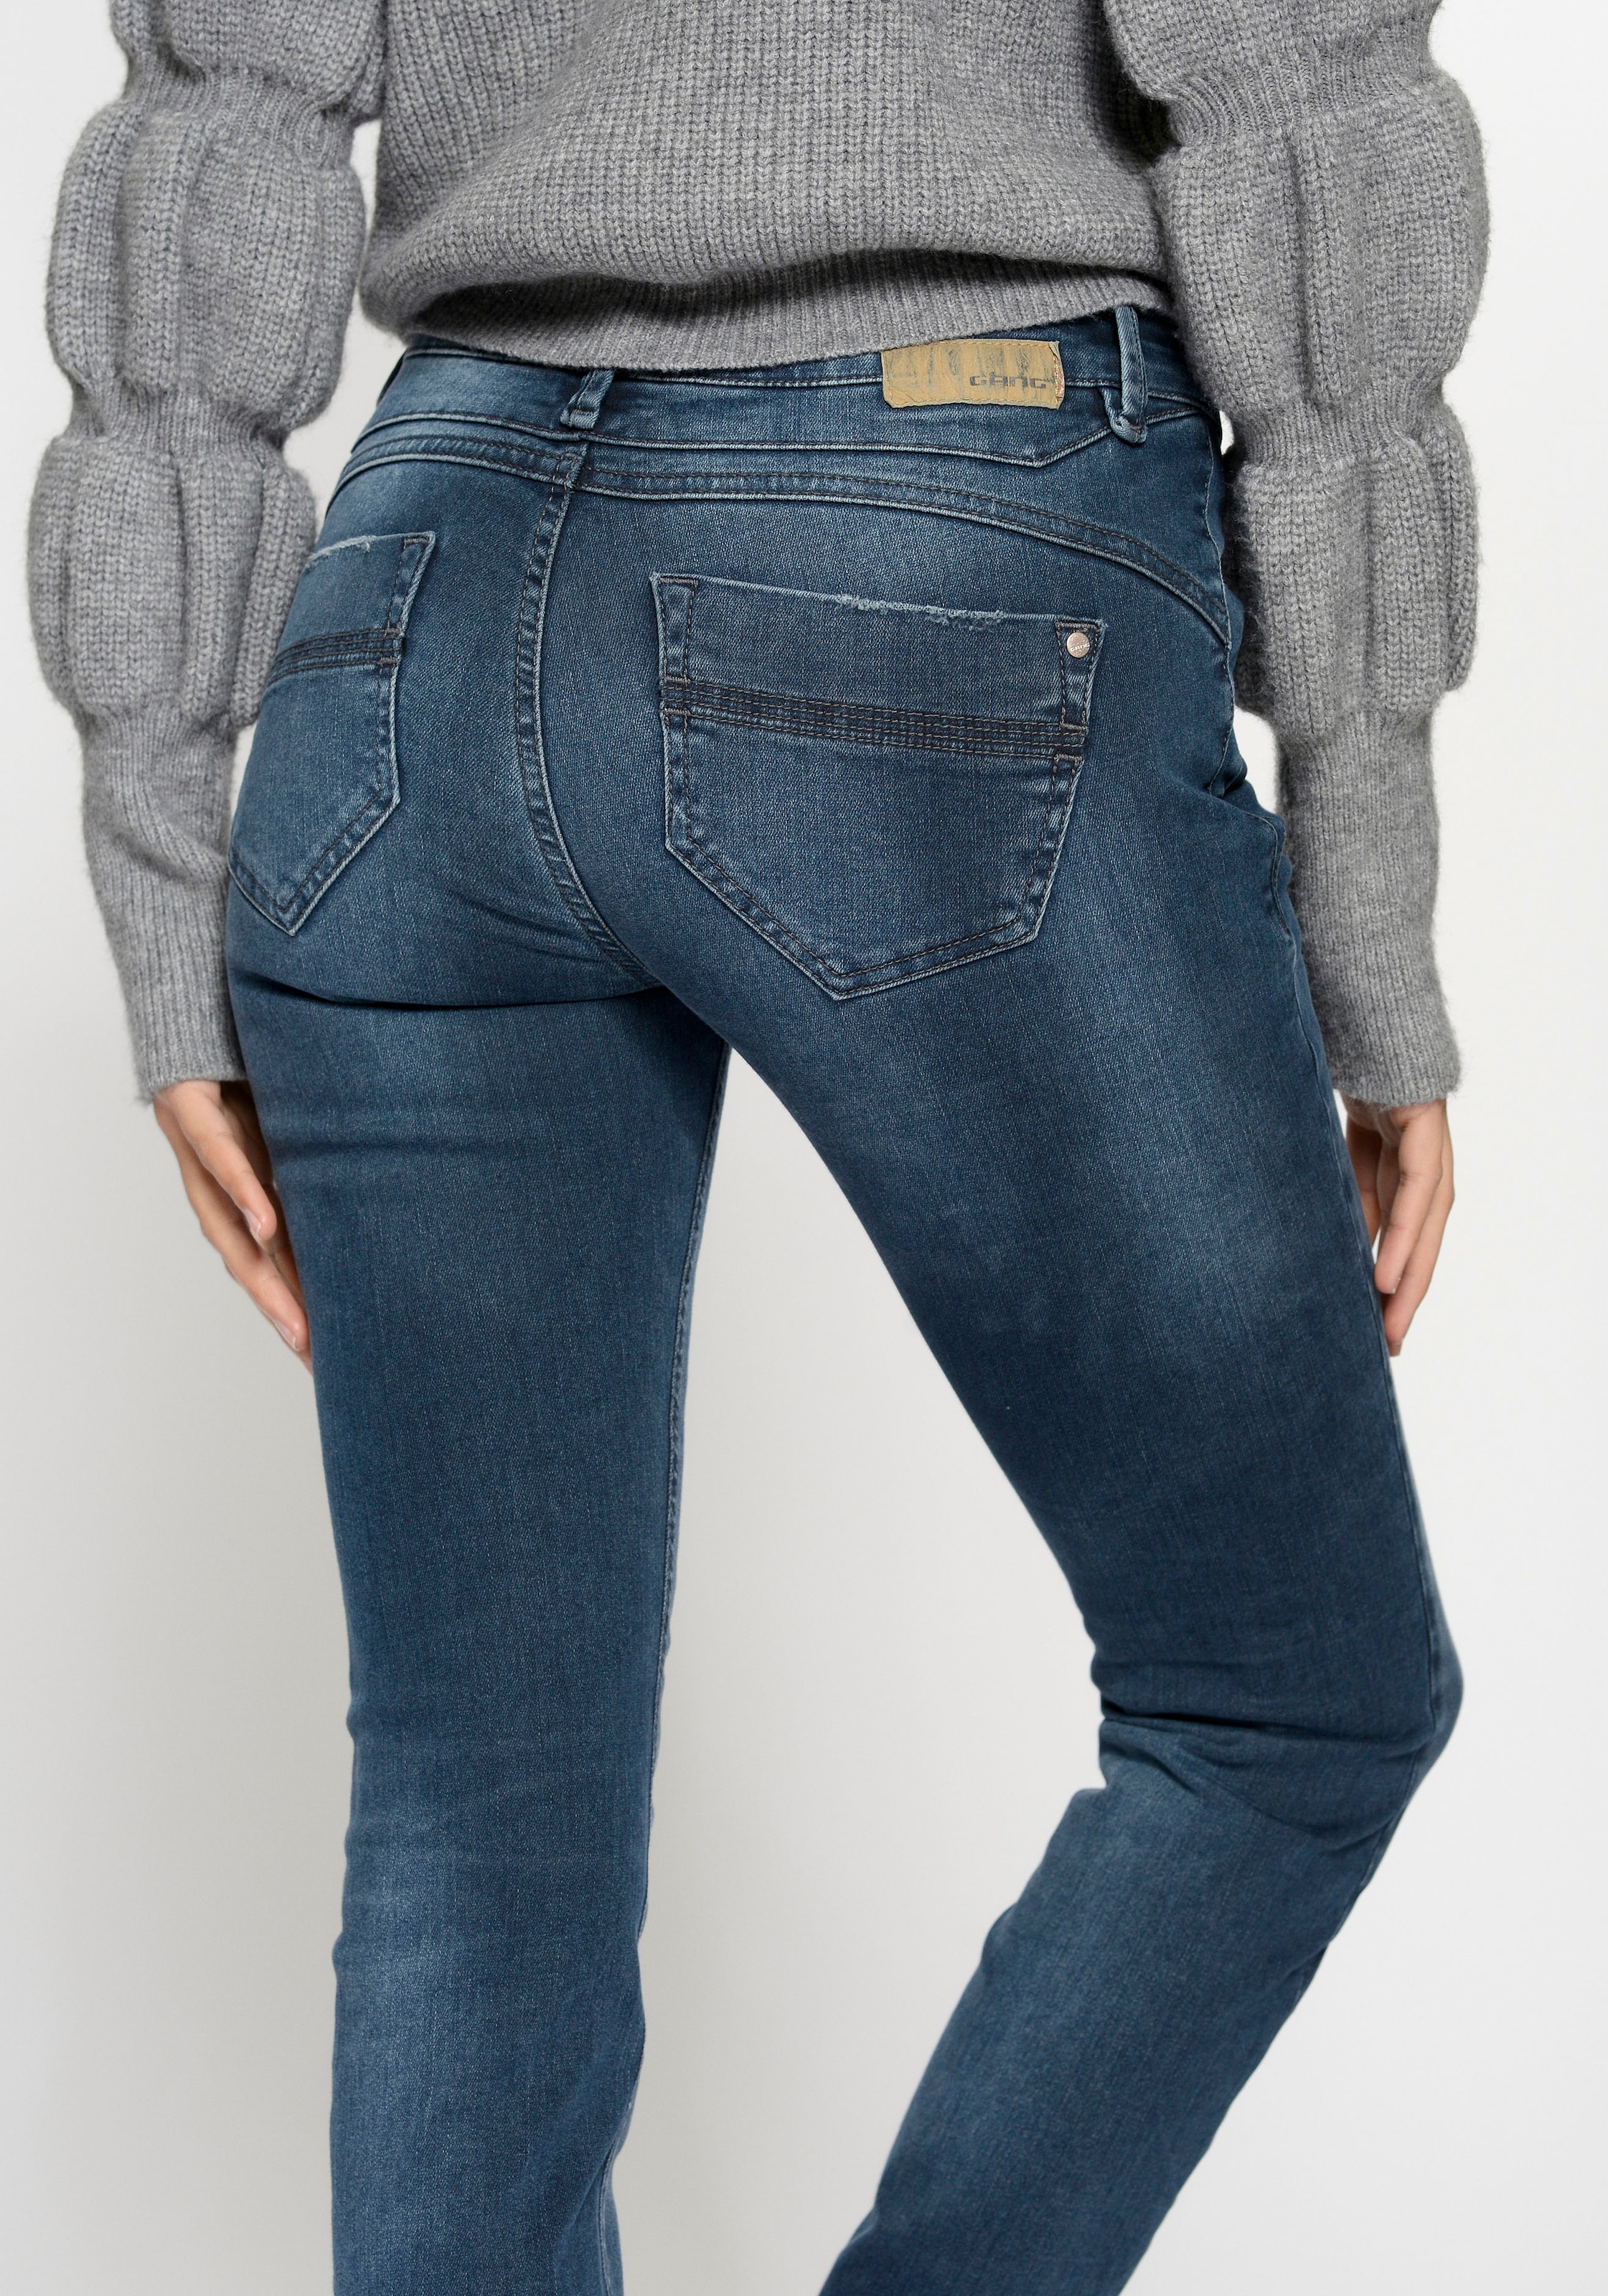 GANG Skinny-fit-Jeans »94 bei online OTTO Nele«